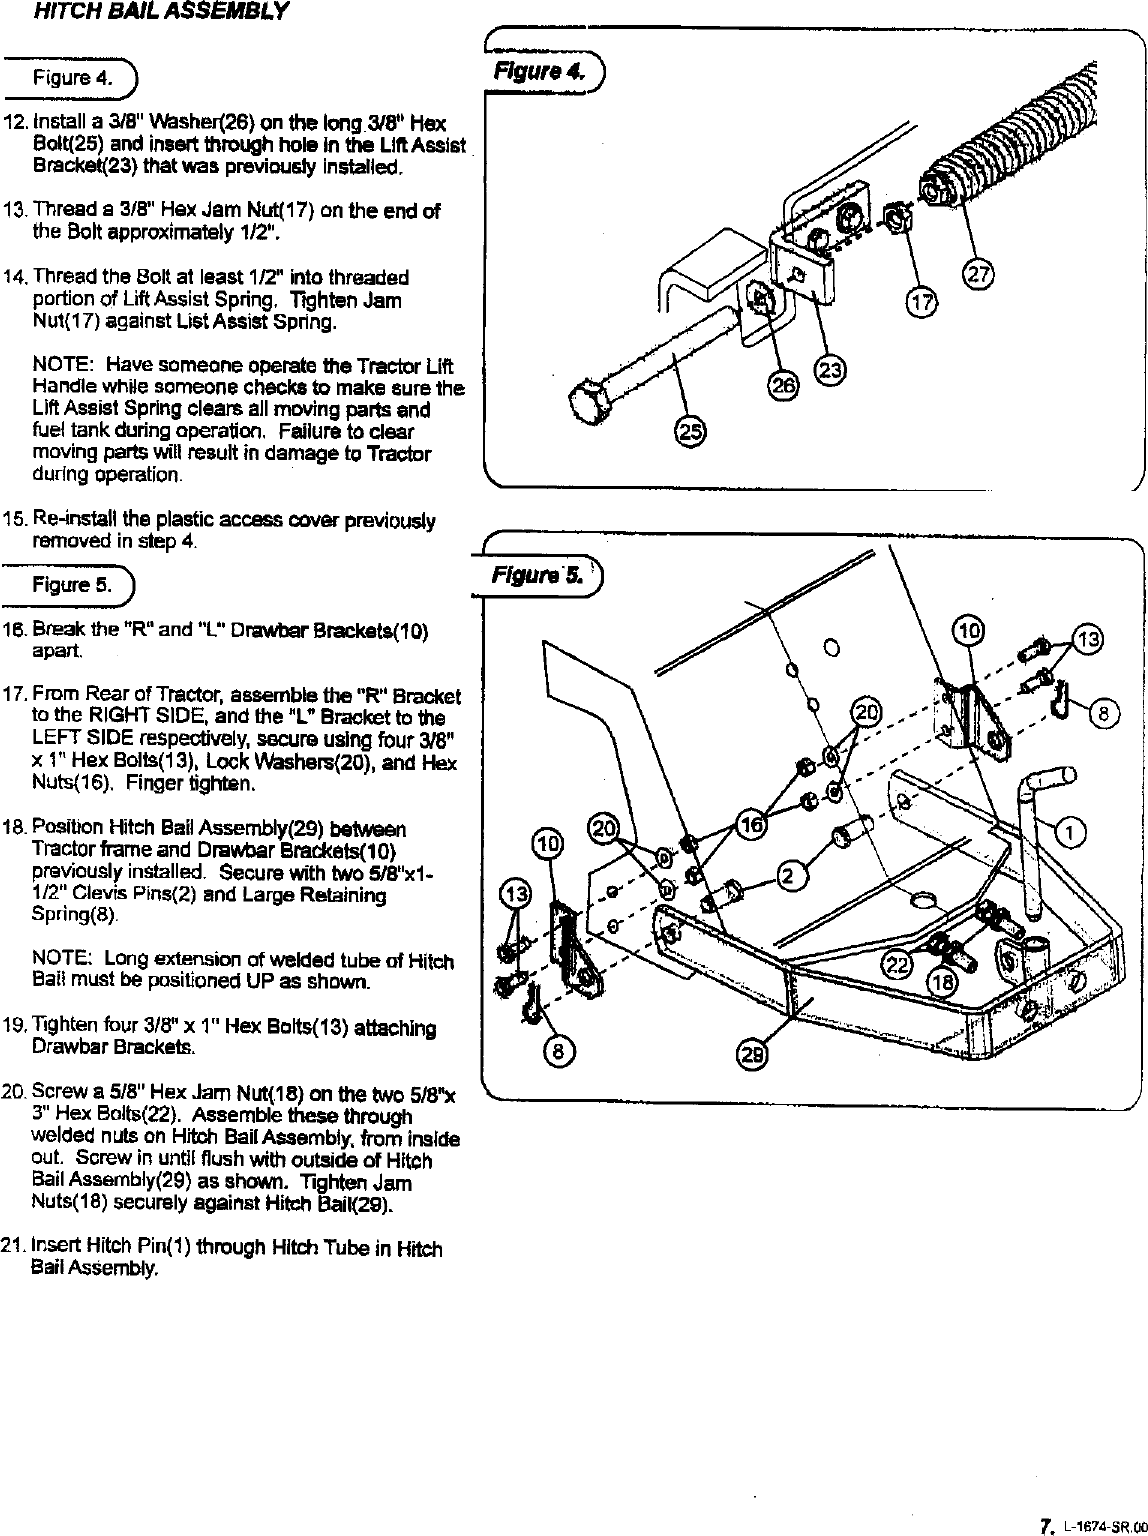 Page 7 of 11 - CRAFTSMAN  Tractor Attachments Manual L0304244